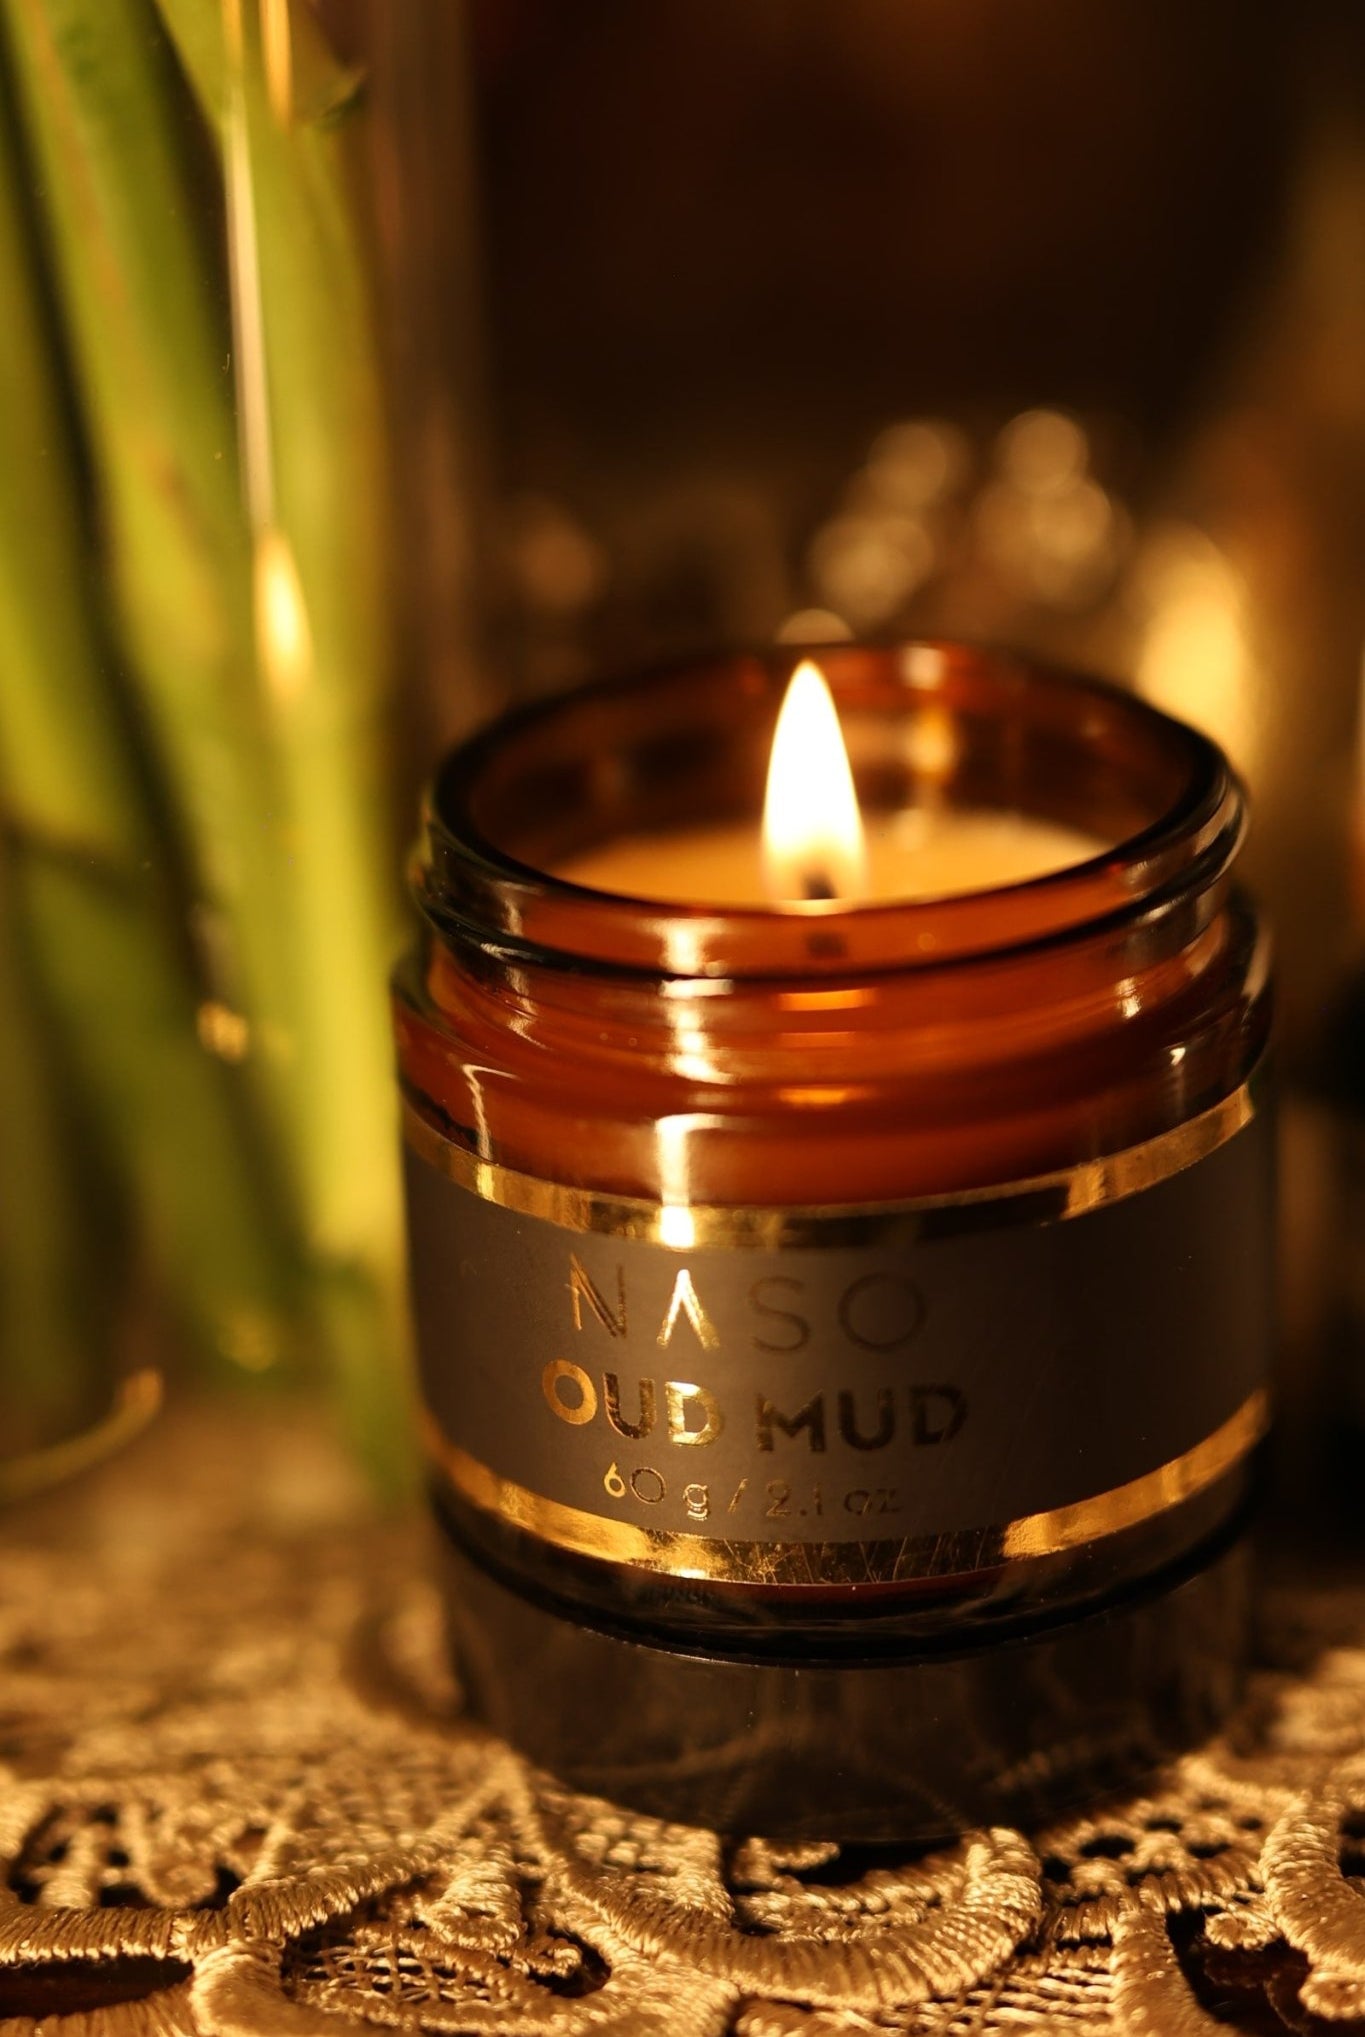 Mud infused in Oud Candle - CiceroniCandleNASO